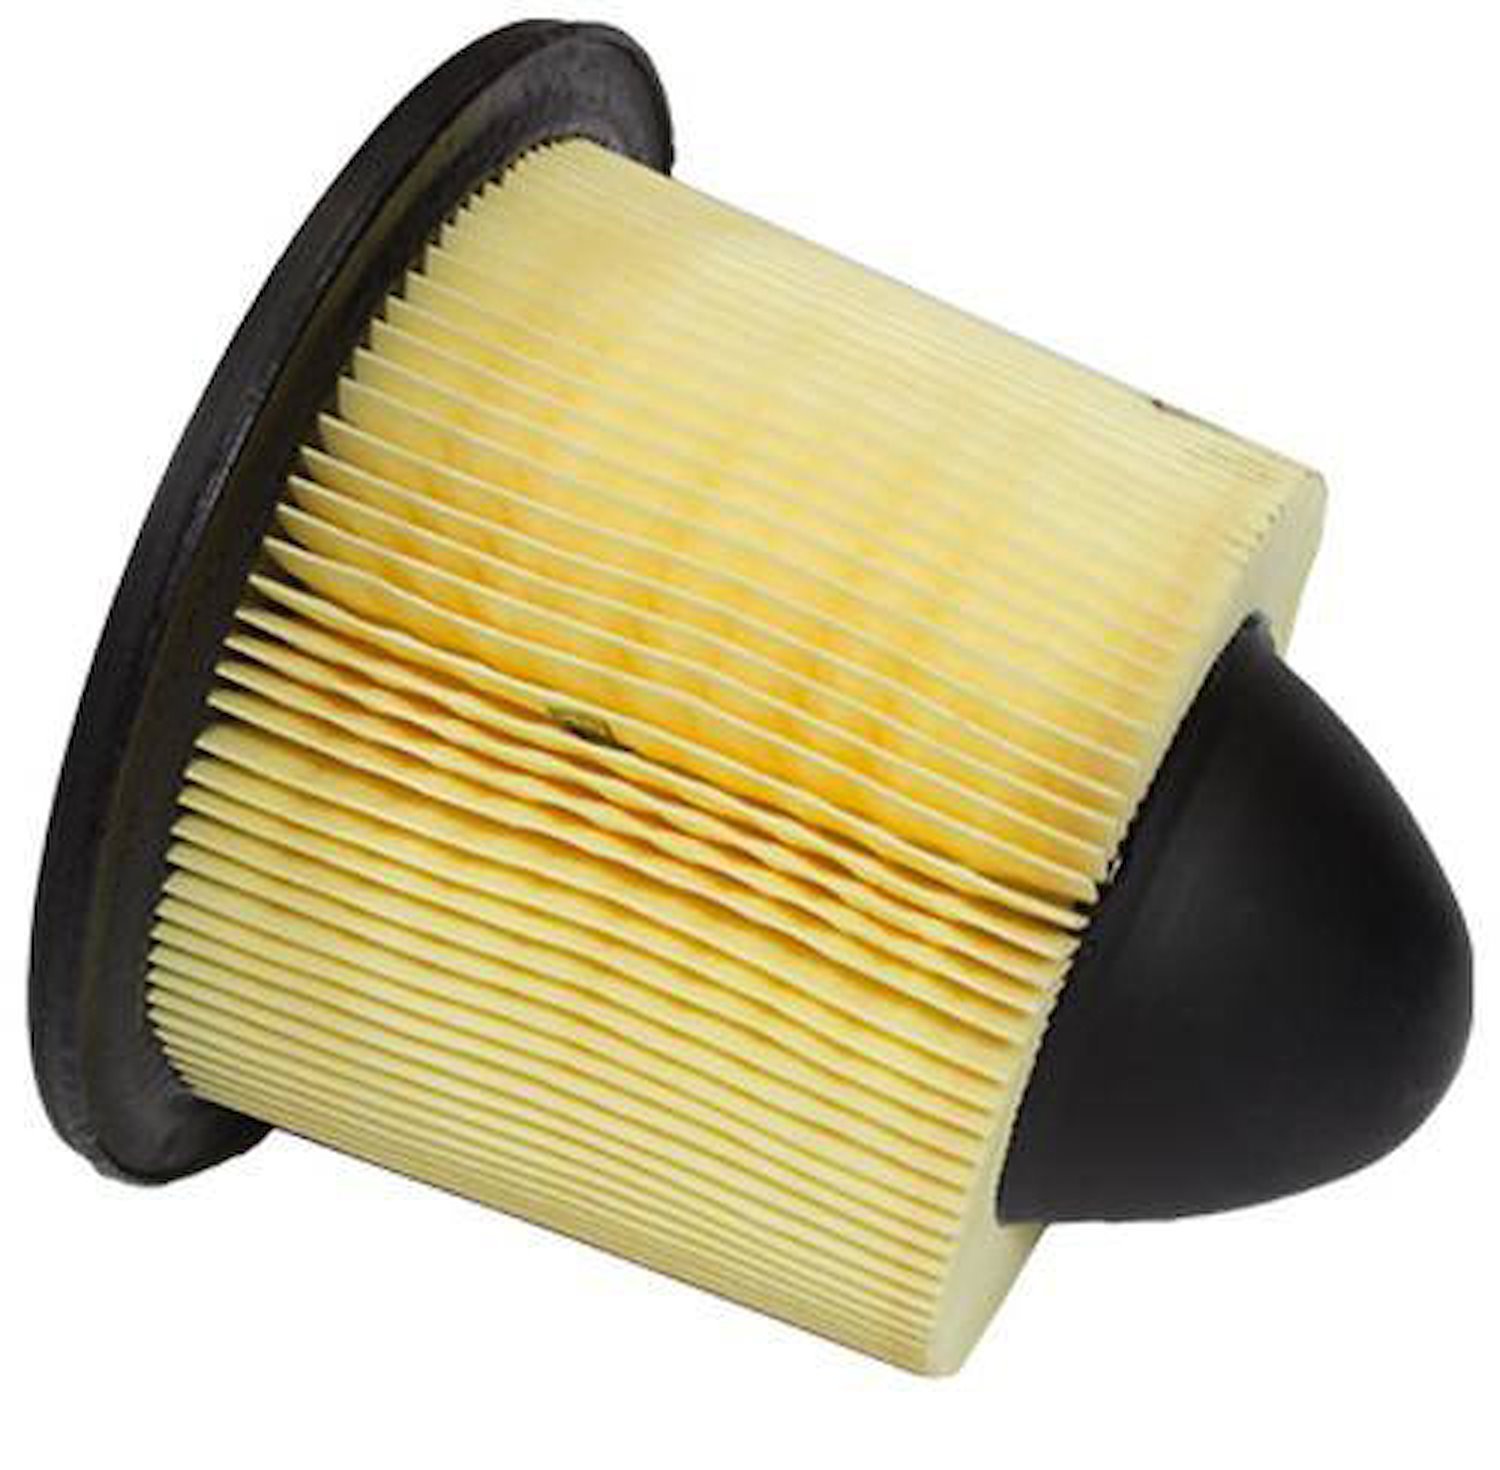 Replacement Air Filter 1997-2016 Ford/Lincoln Vehicles